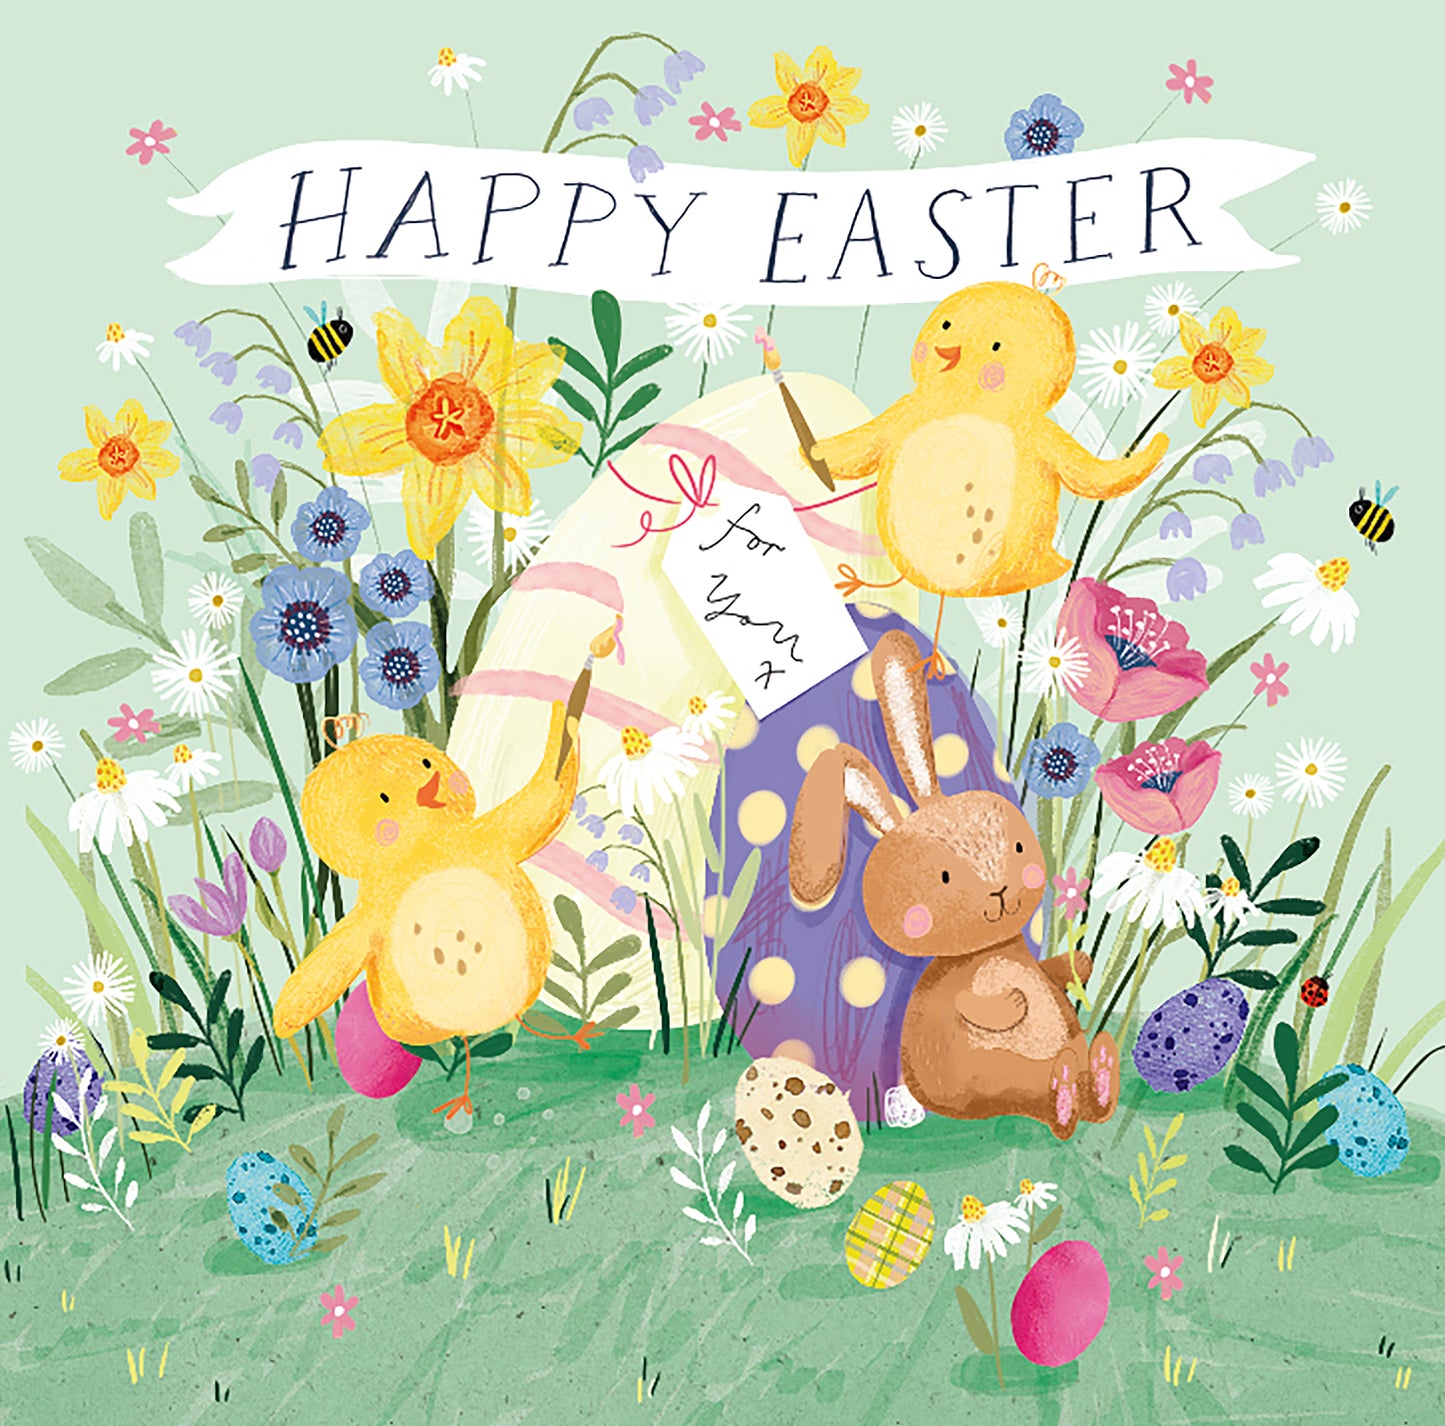 Pack Of 5 Happy Easter Chirpy Easter Fun Pack Of Easter Greeting Cards